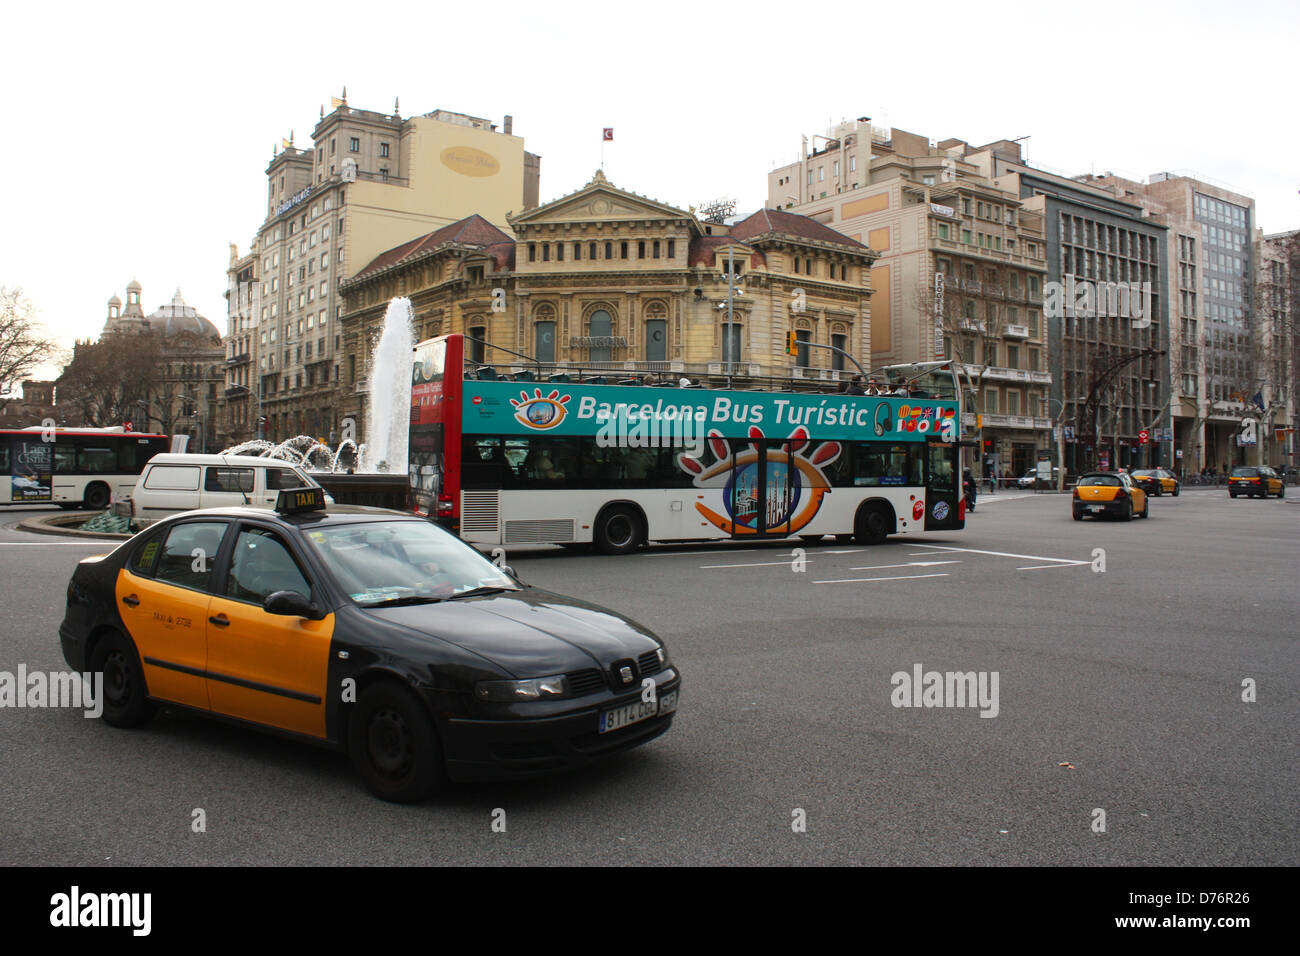 Taxi and Barcelona open top tourist bus Stock Photo